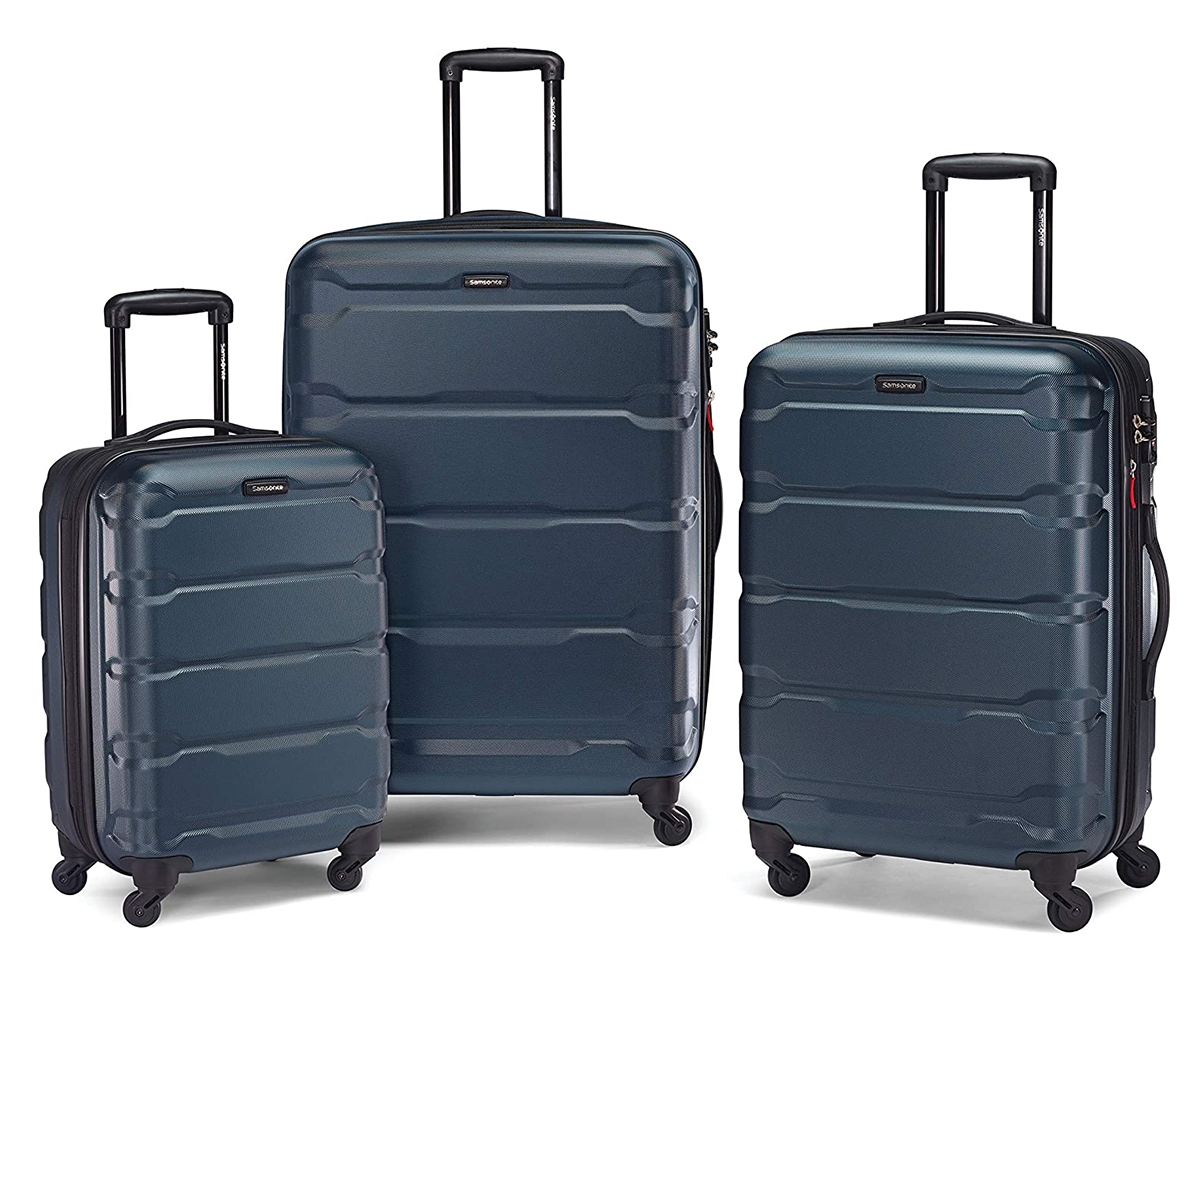 Portaal Lezen Ontbering Prime Day Can't-Miss Deal: Save $270 on This Samsonite Luggage Set - E!  Online